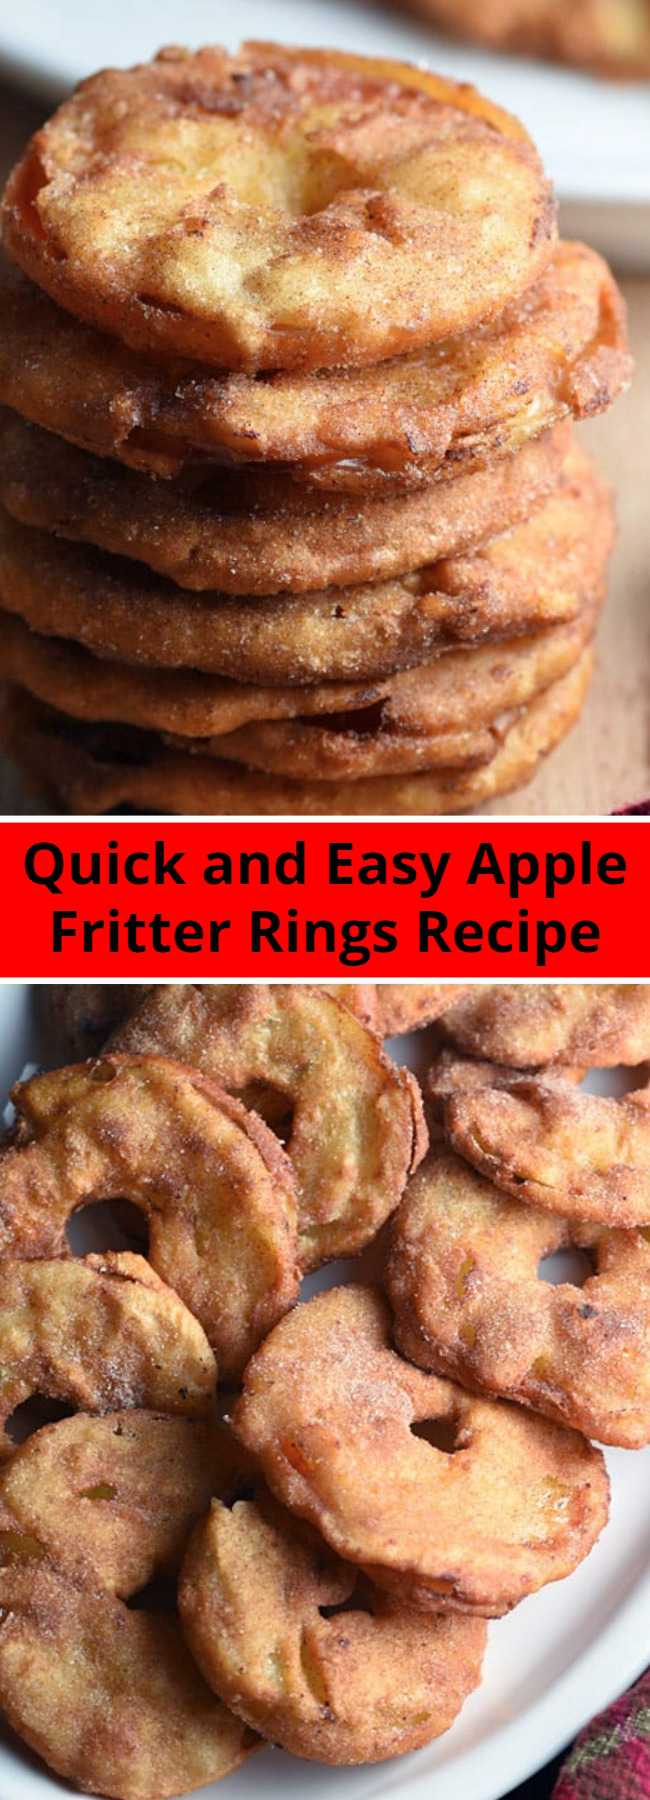 Quick and Easy Apple Fritter Rings Recipe - These Apple Fritter Rings are a fun spin on the popular donut shop Apple Fritter. Like a sweet apple version of an onion ring! #applefritters #applefritterrings #applefritterringsrecipe #appleringsfried